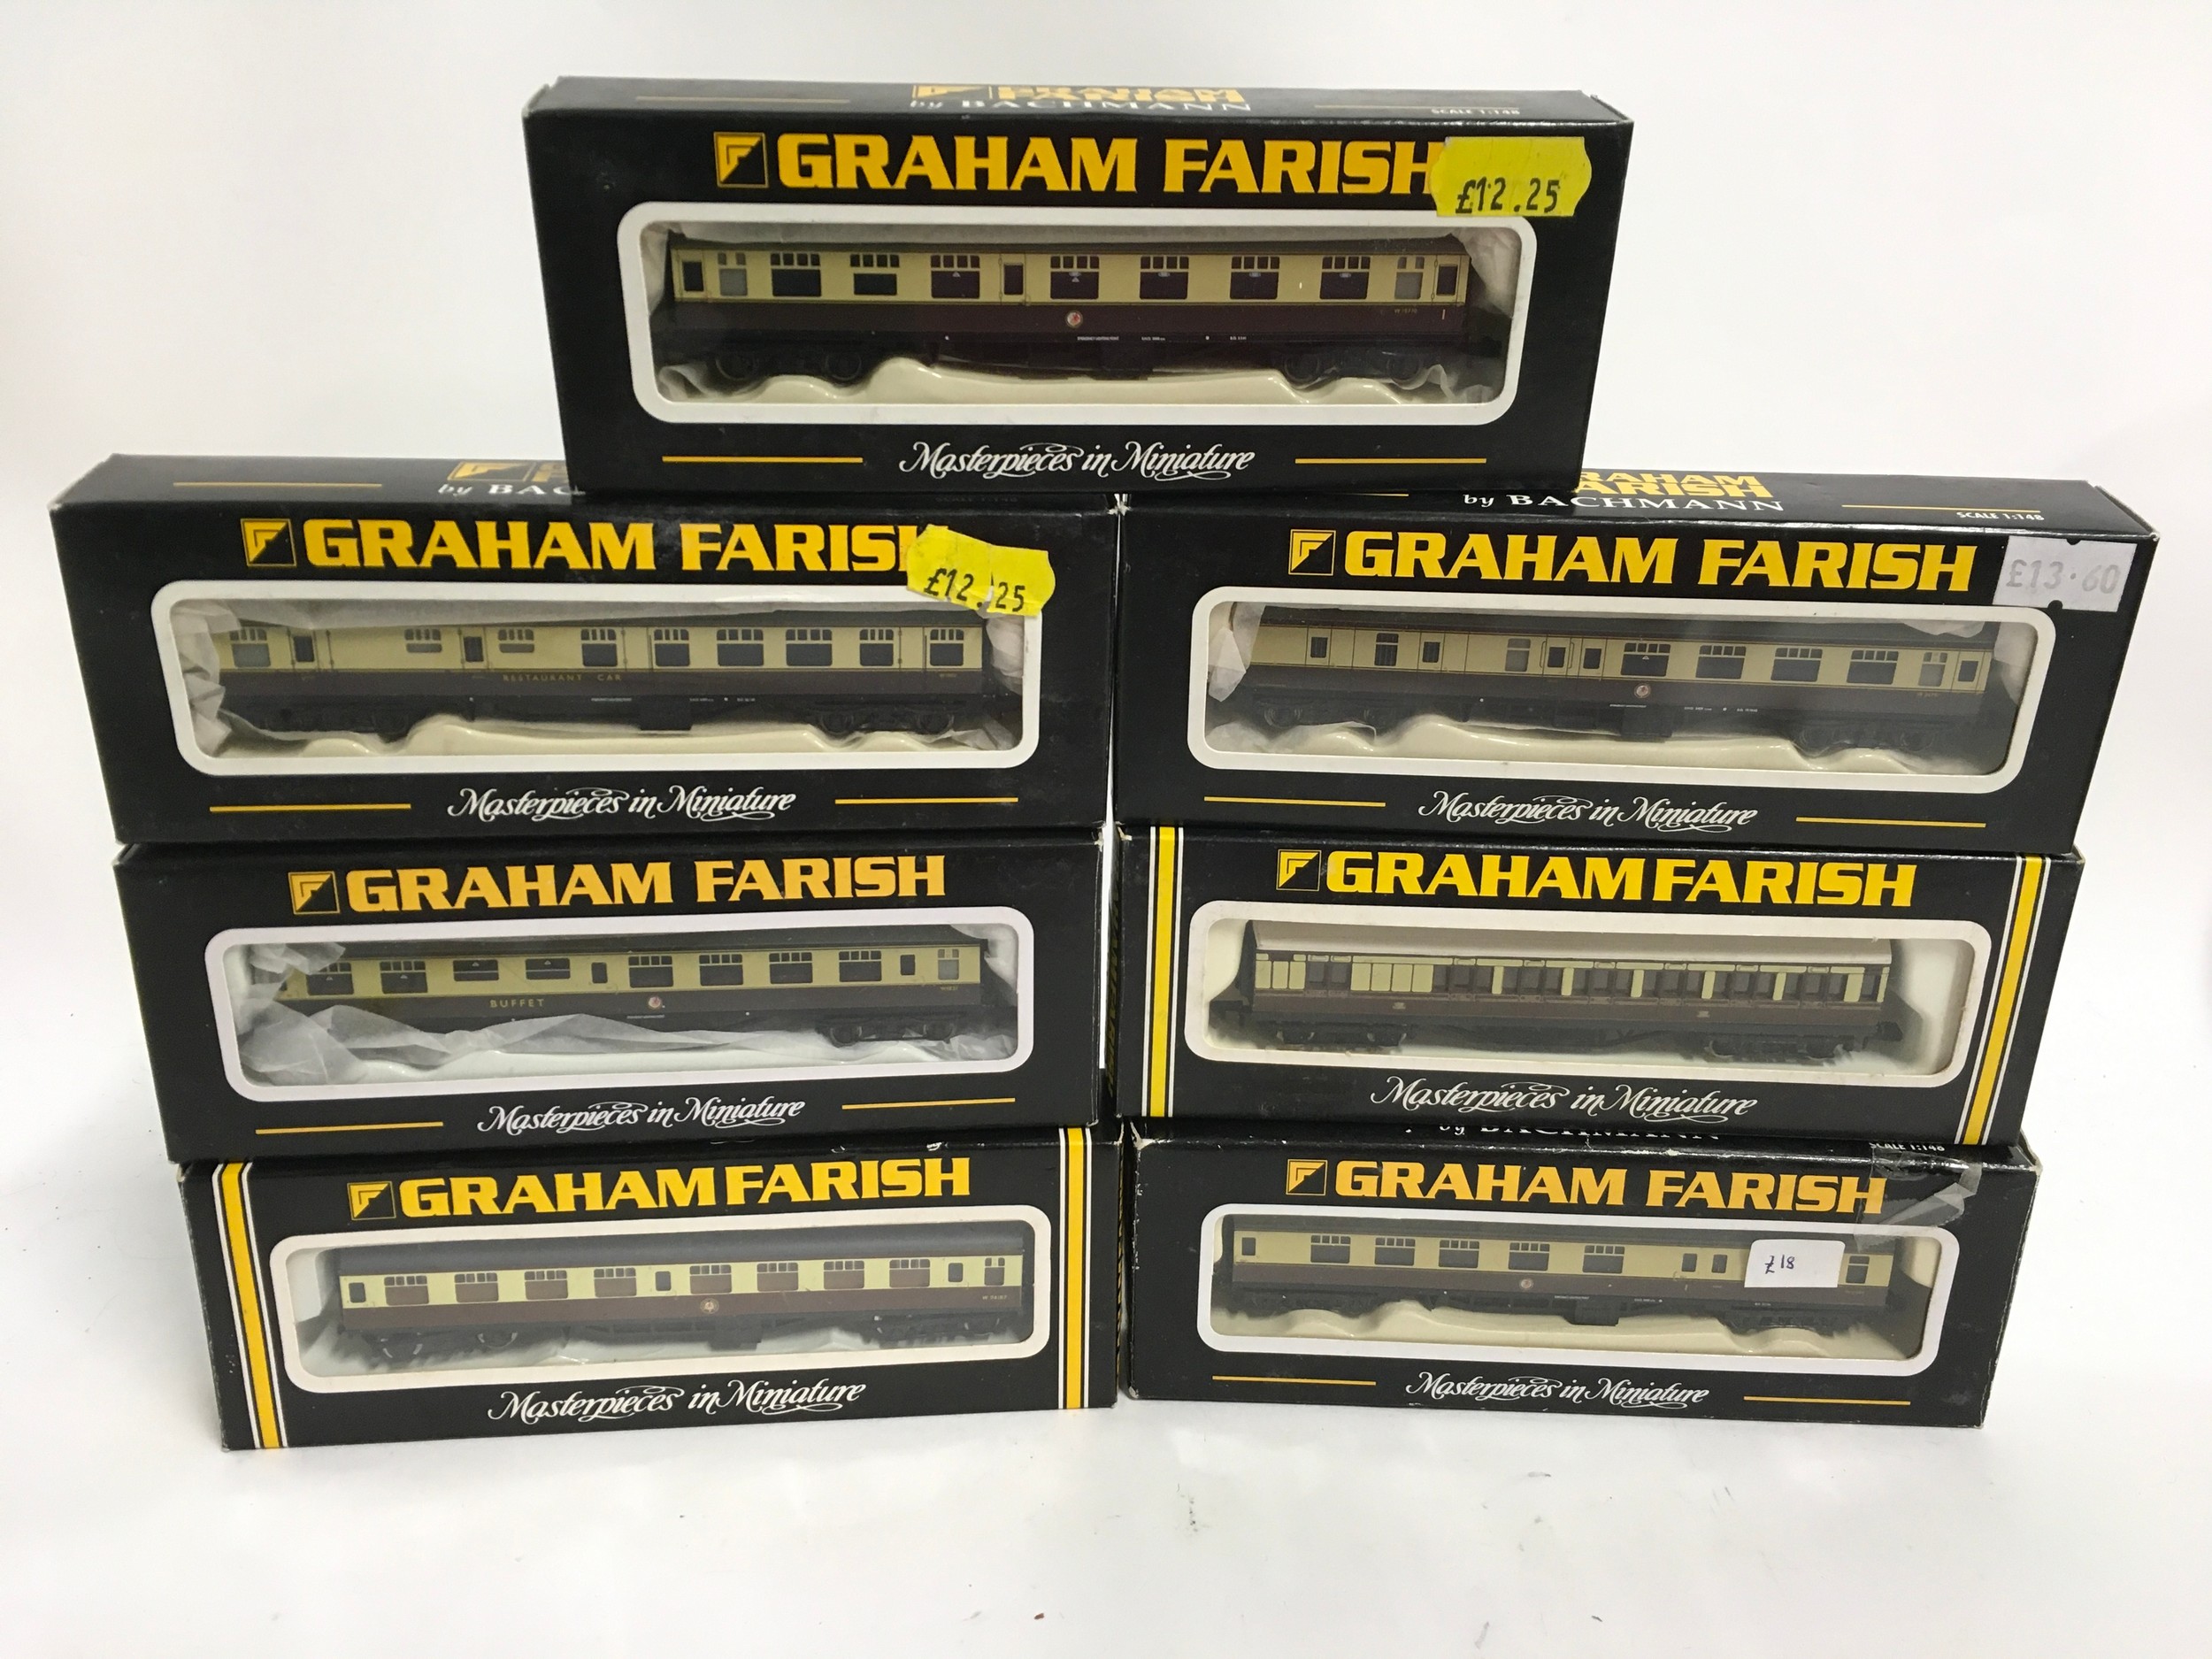 7 x assorted Graham Farish N Gauge Chocolate and Cream coaches, boxed.